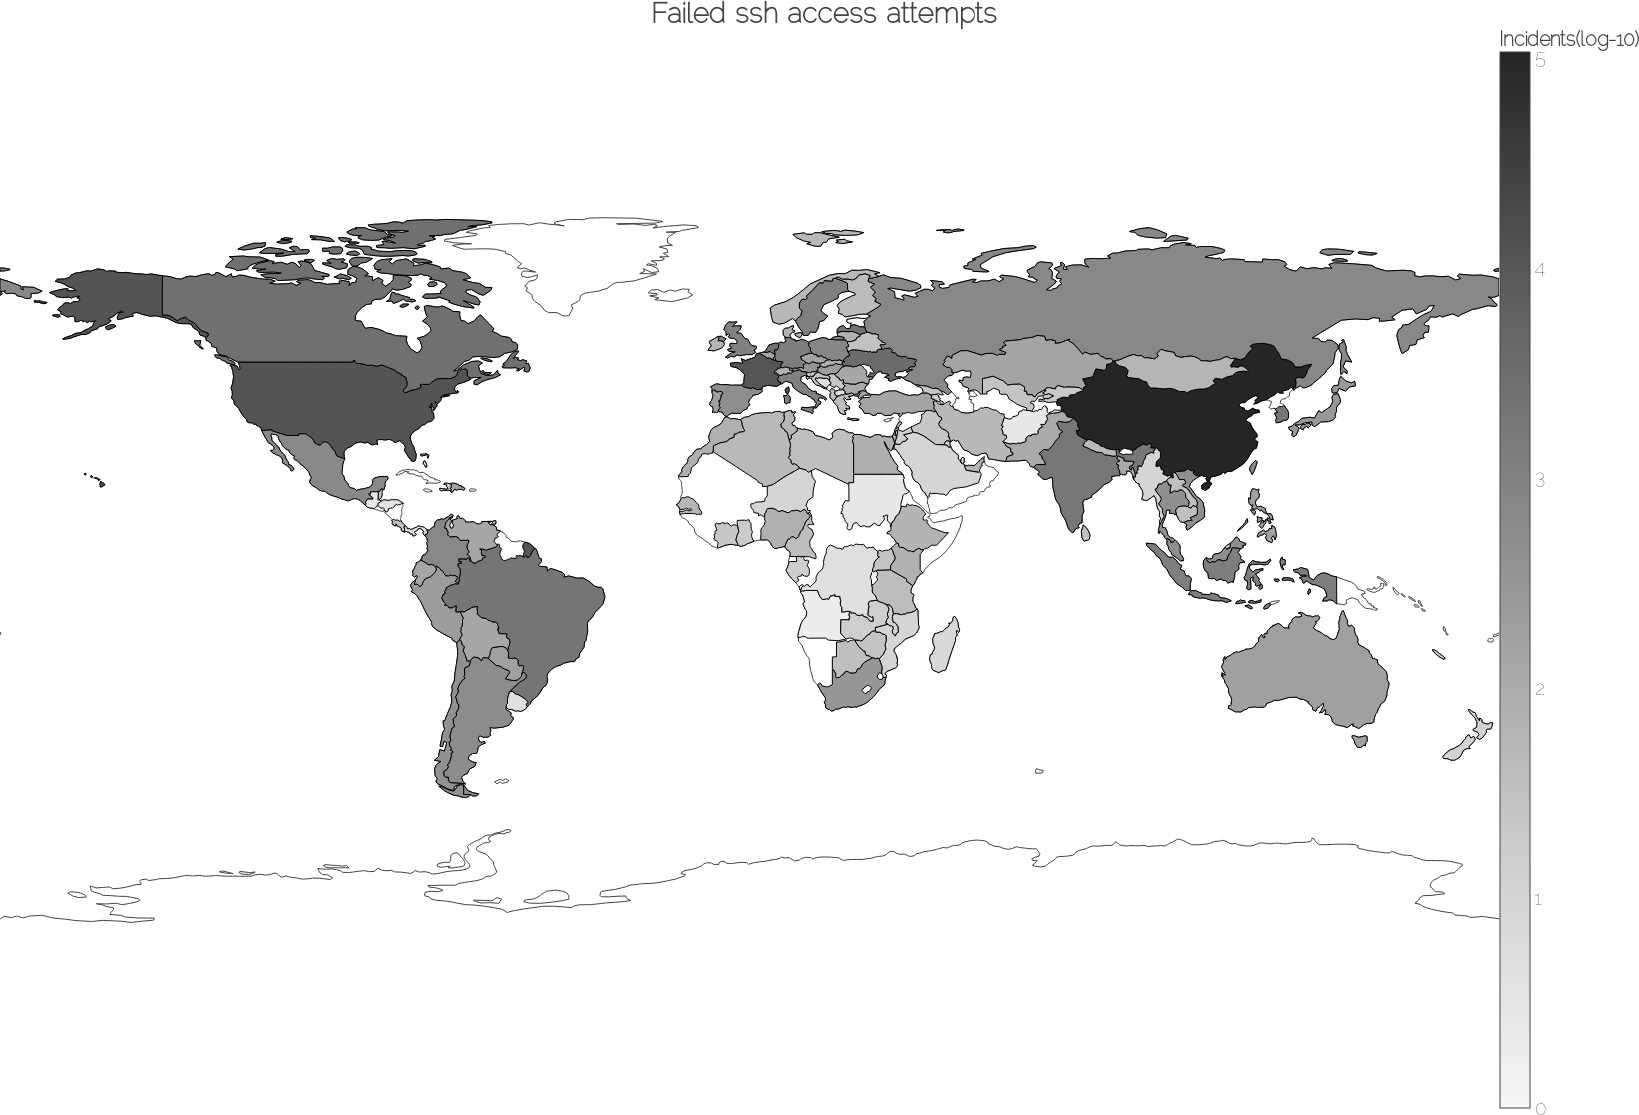 A world map of all failed ssh access attempts